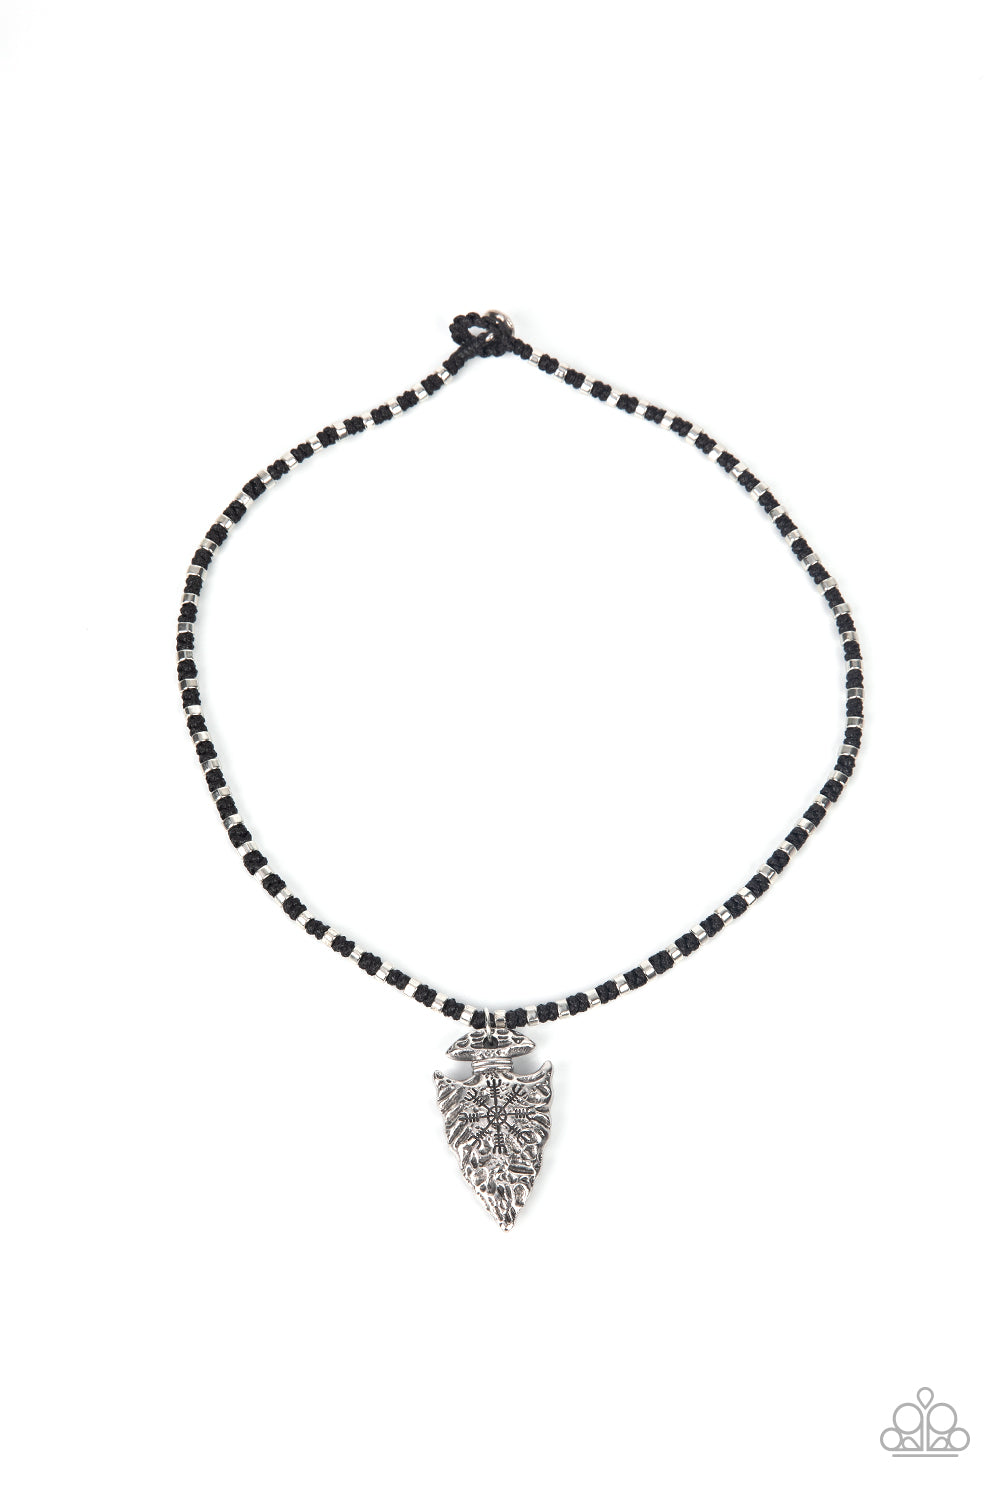 Get Your ARROWHEAD in the Game - Black urban necklace A050